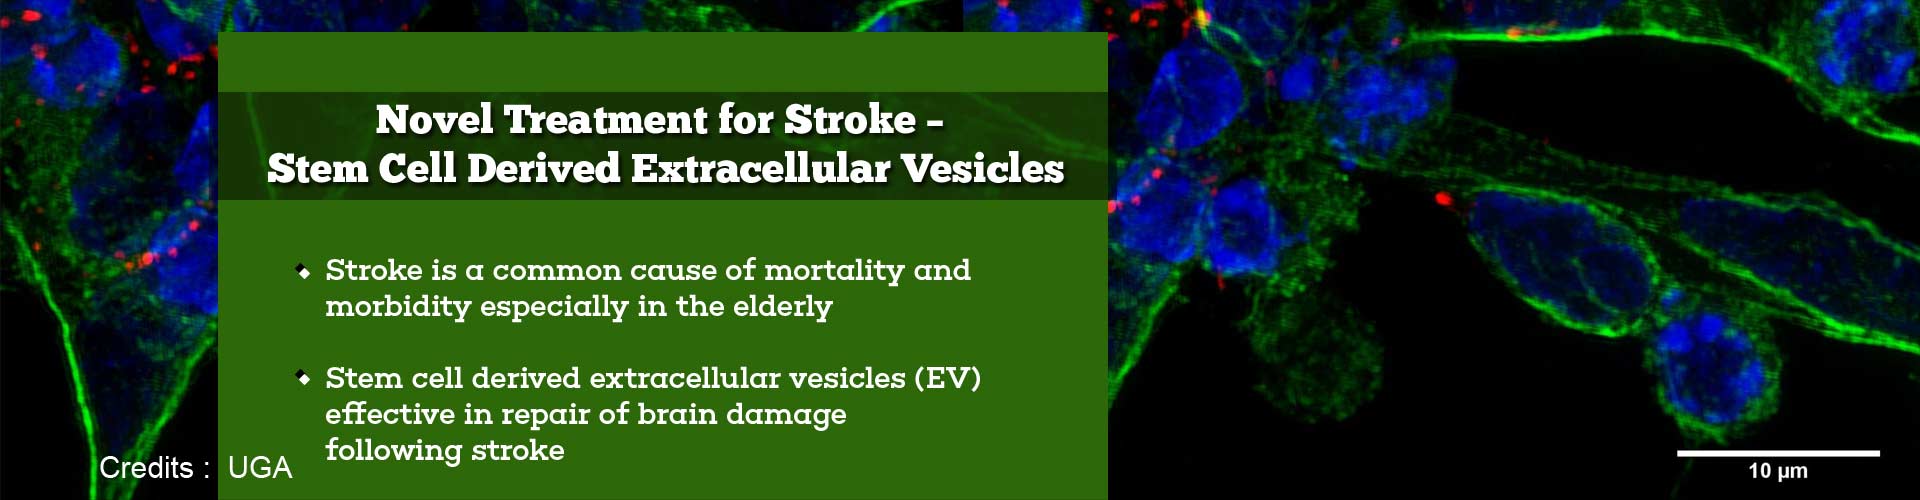 novel treatment for stroke - stem cell derived extracellular vesicles
- stroke is a common cause of mortality and morbidity especially in the elderly
- stem cell derived extracellular vesicles (EV) effective in repair of brain damage following stroke